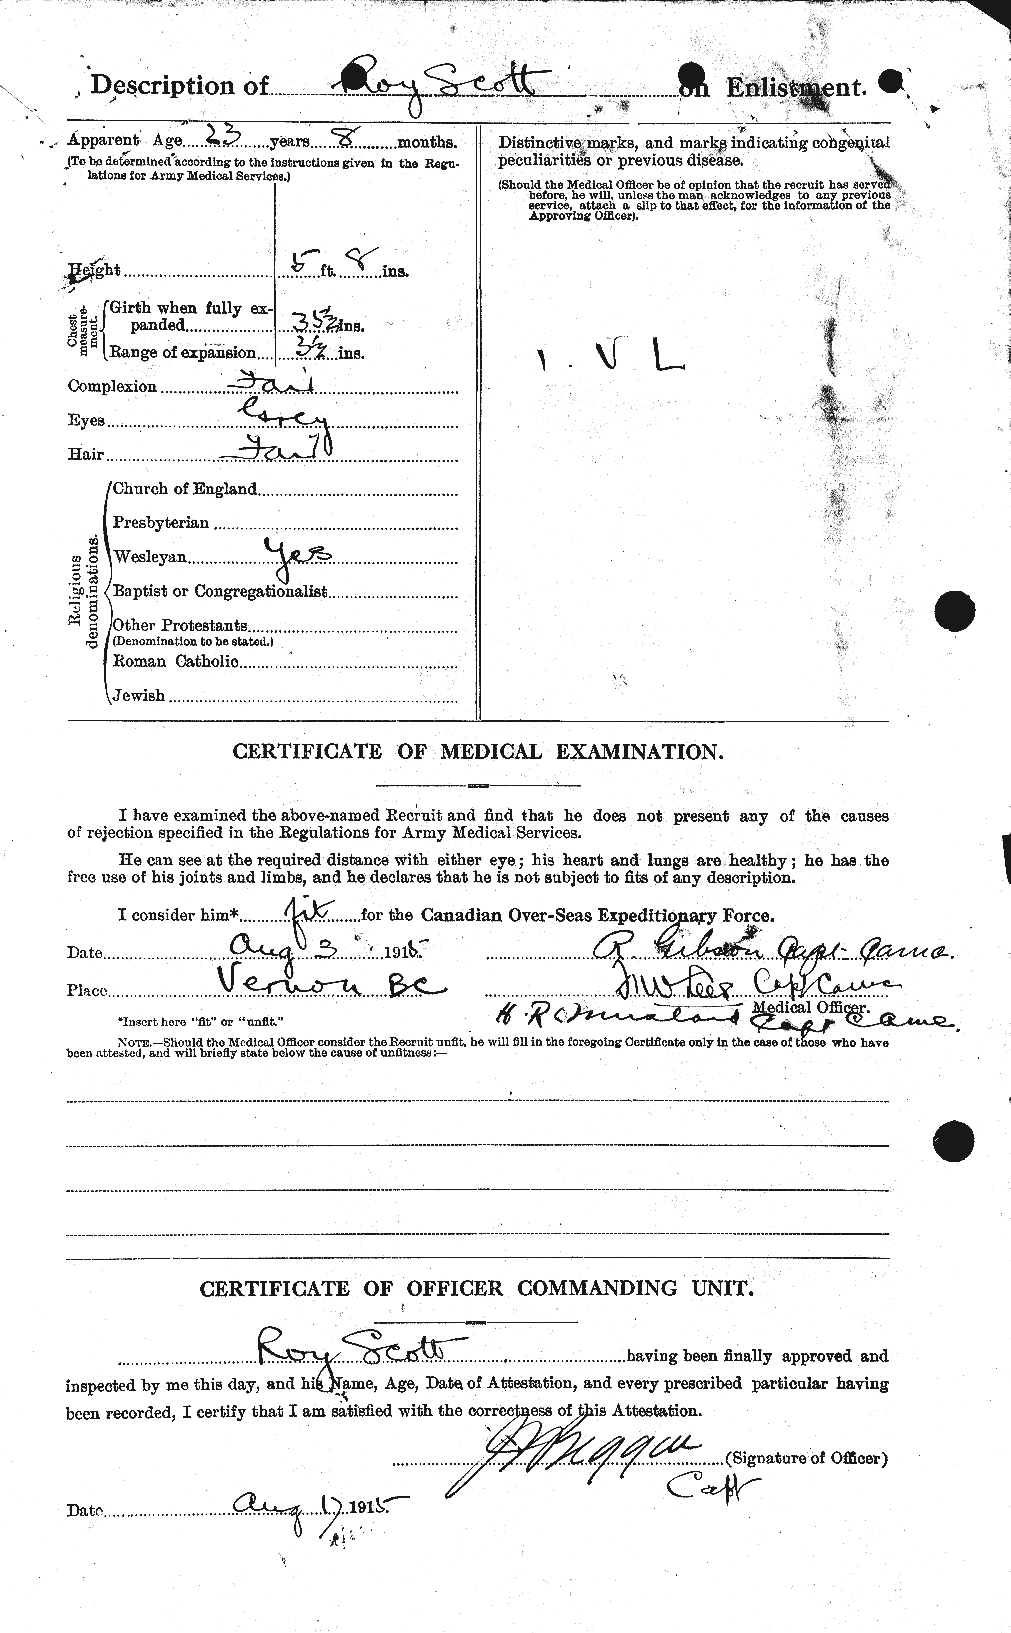 Personnel Records of the First World War - CEF 089103b